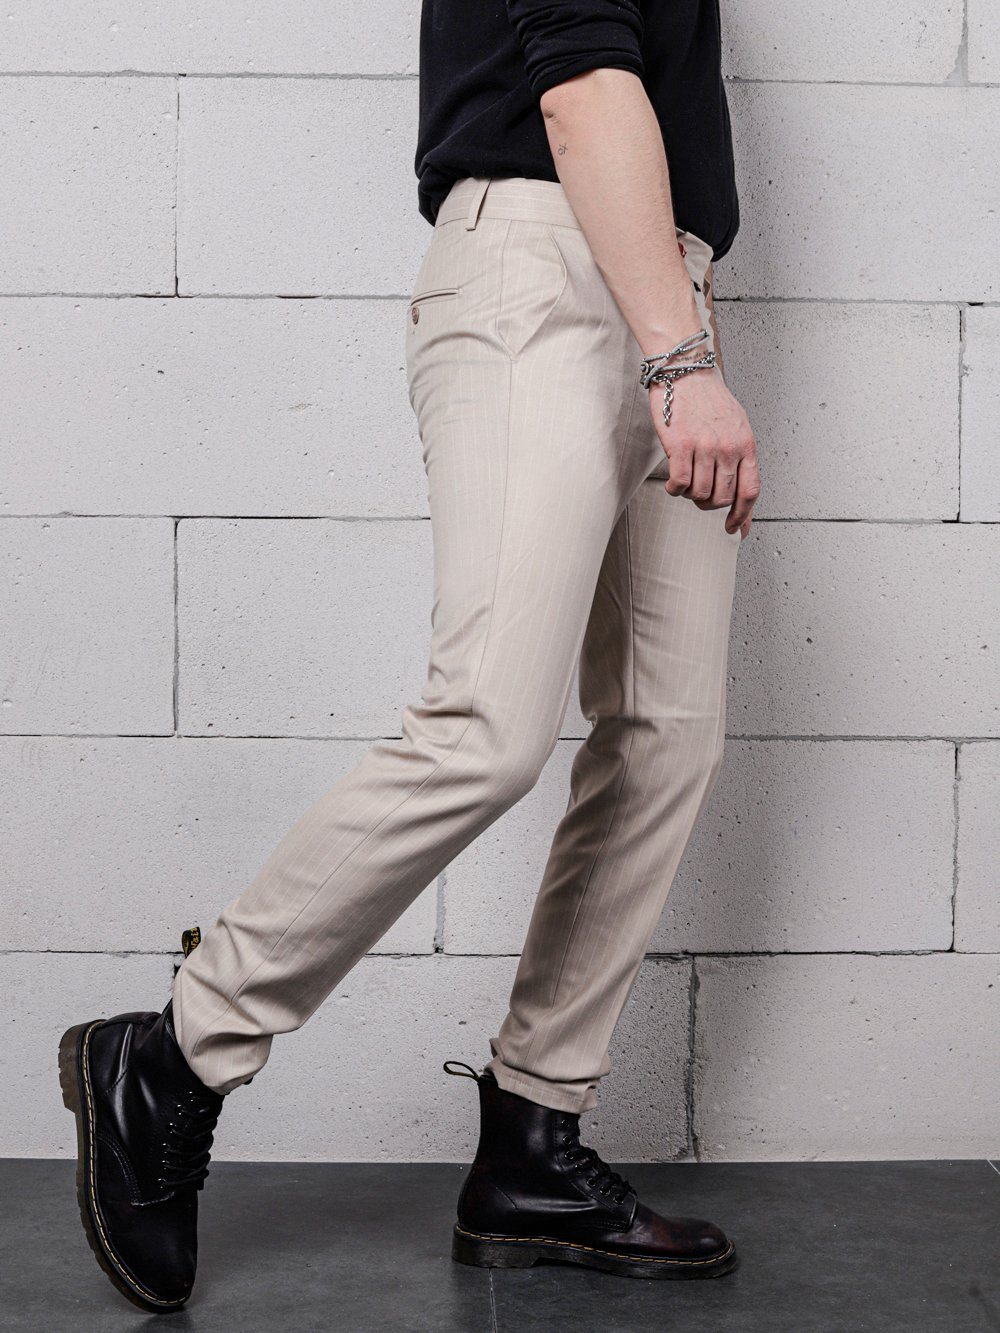 A man wearing a black shirt and beige pants with a trendy LA CREME aesthetic.